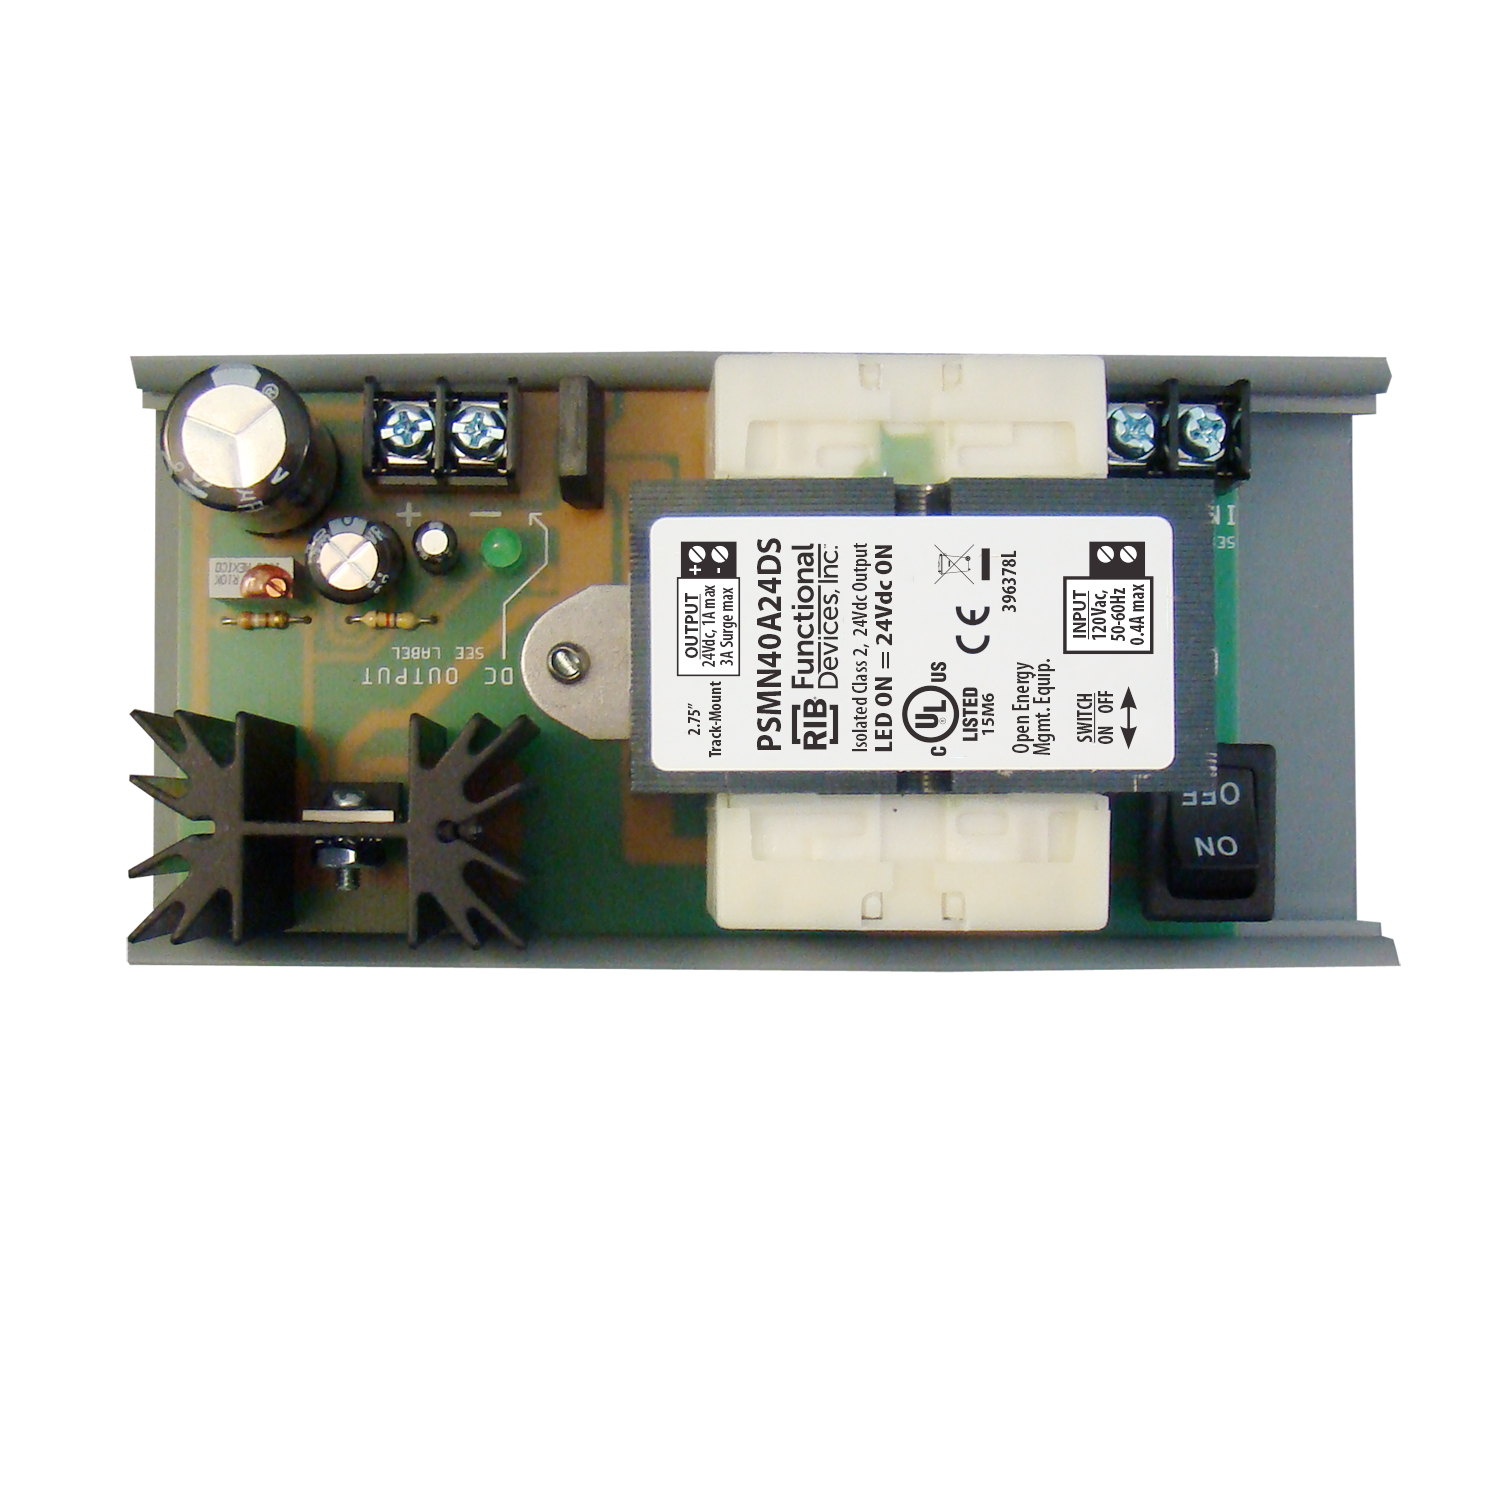 Functional Devices PSMN40A24DS DC Power Supply, Isolated Linear, 120 Vac to  24 Vdc, Amp Output, 2.75